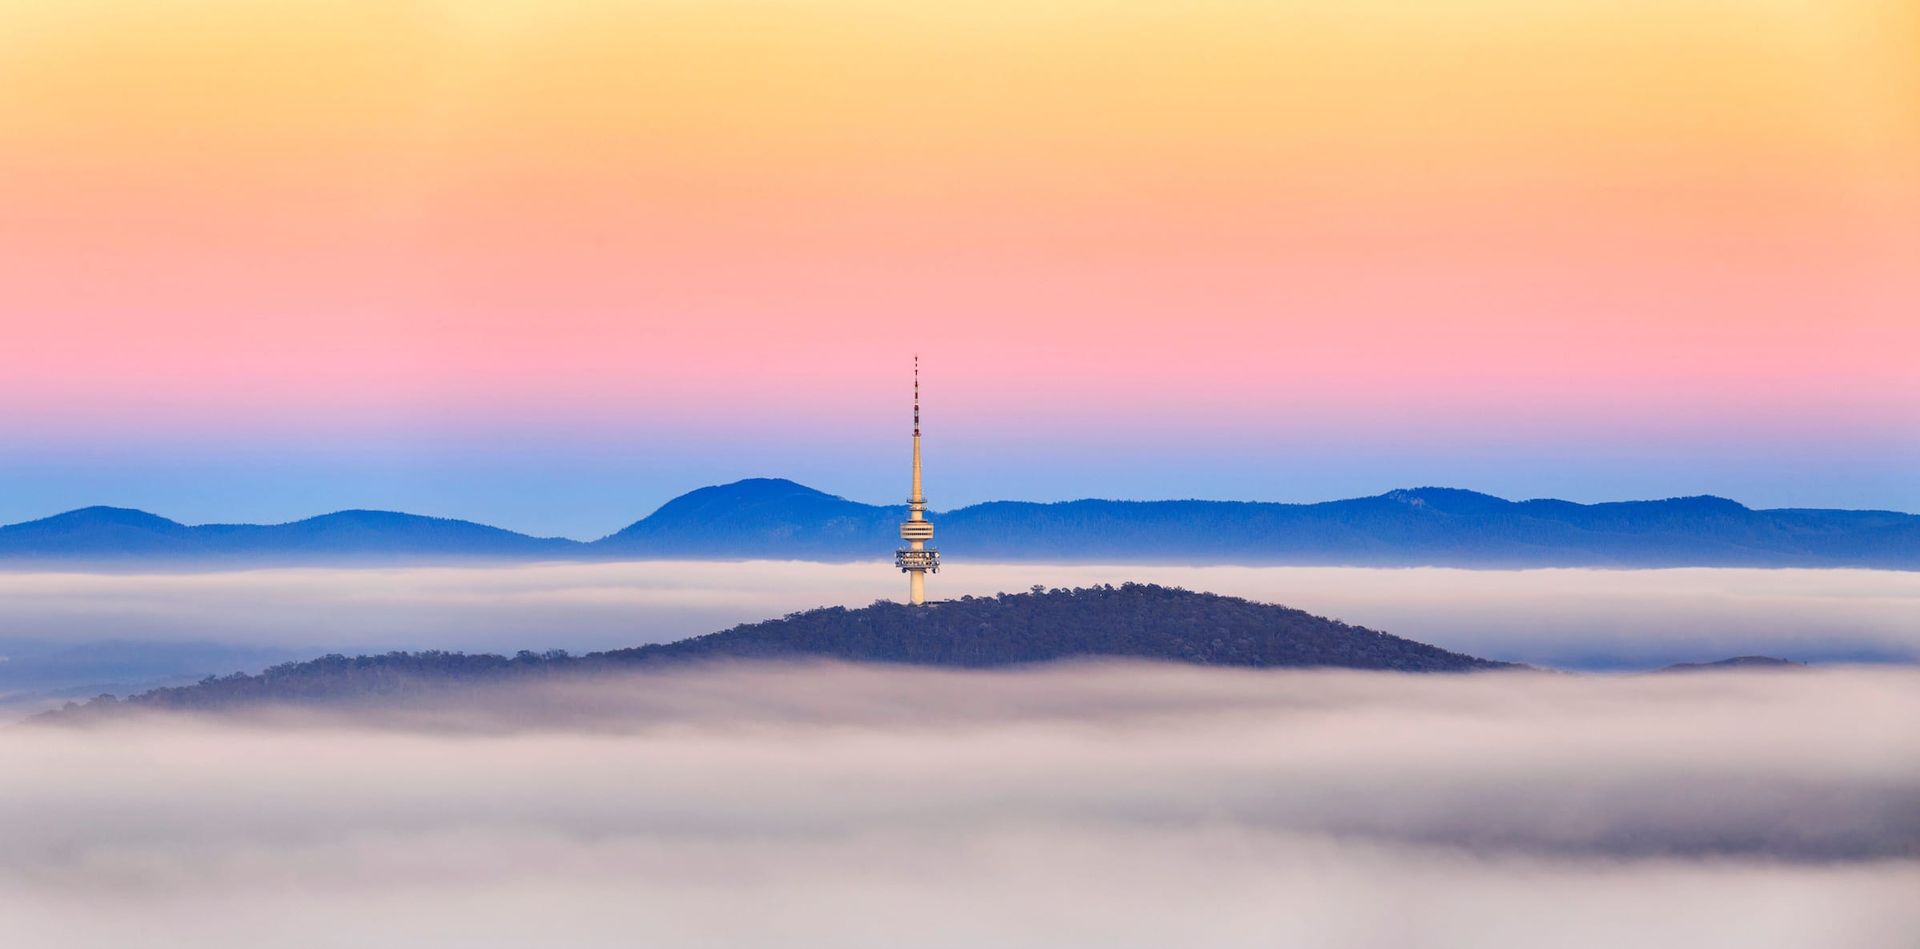 A tower in the middle of a foggy valley with mountains in the background.